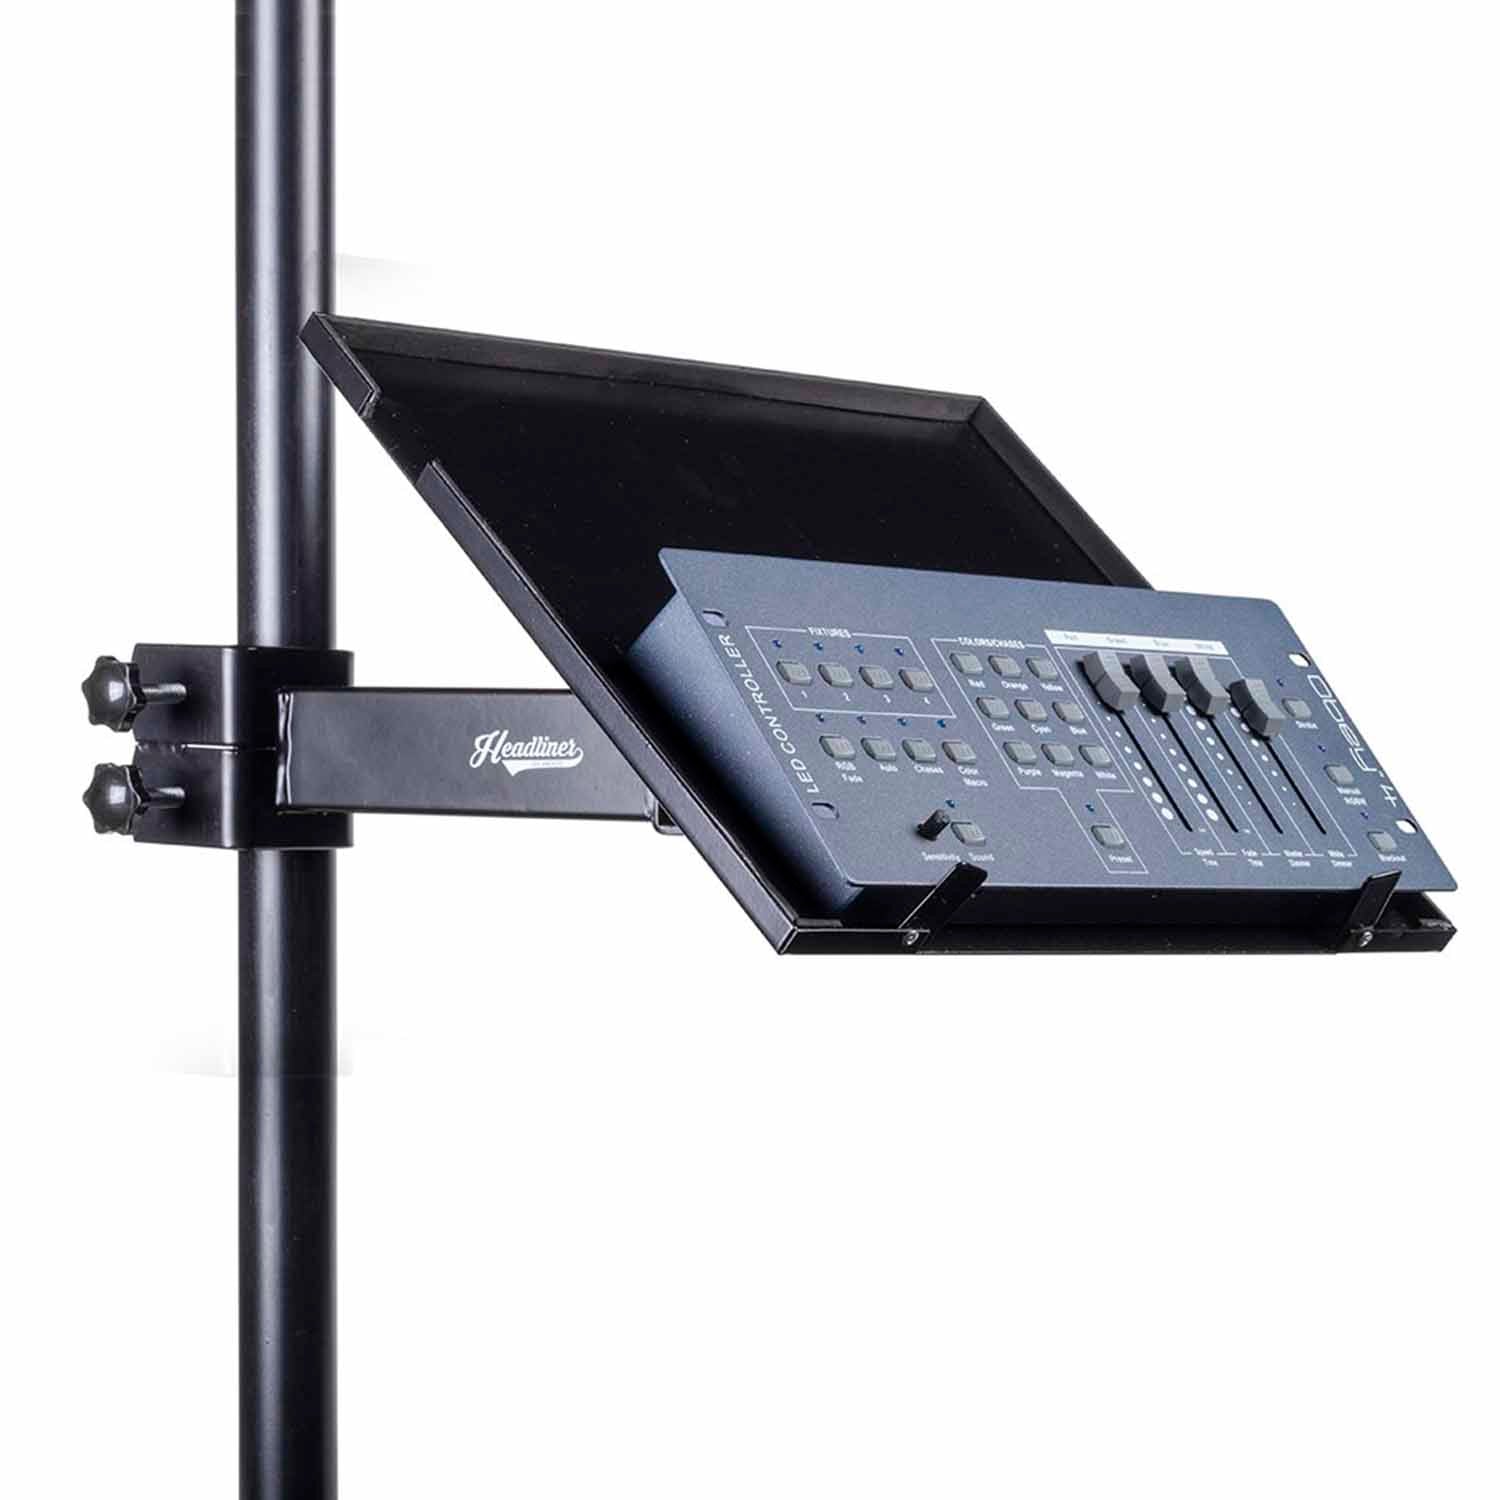 B-Stock: Headliner HL31000, Accessory Tray For Mic Stands, Speakers Stands and Lighting Bars Mount - Hollywood DJ